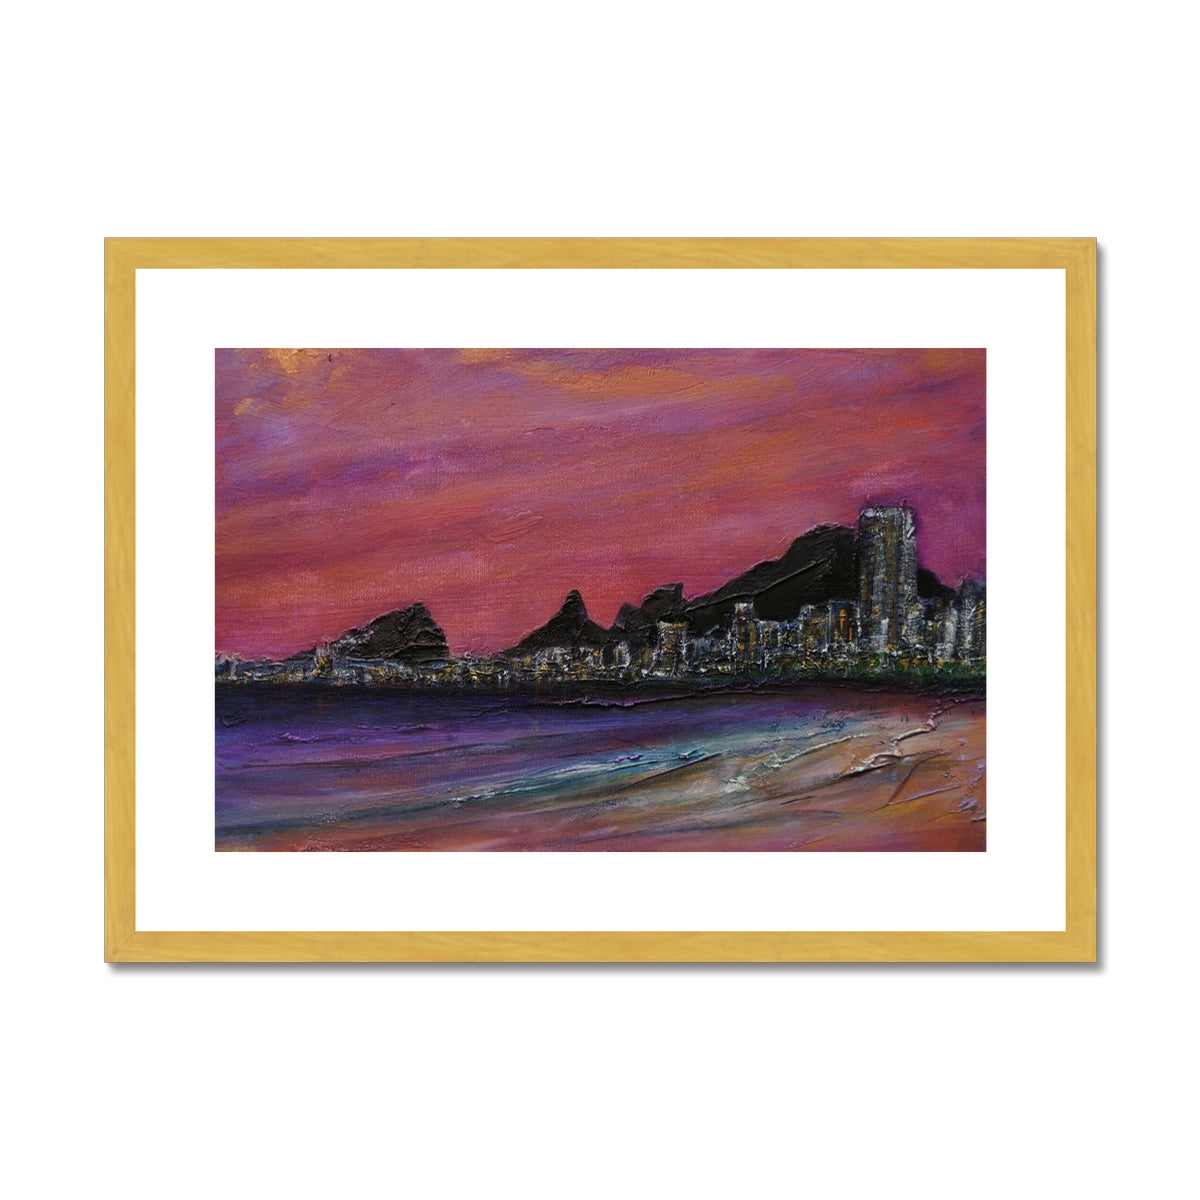 Copacabana Beach Dusk Painting | Antique Framed & Mounted Prints From Scotland-Antique Framed & Mounted Prints-World Art Gallery-A2 Landscape-Gold Frame-Paintings, Prints, Homeware, Art Gifts From Scotland By Scottish Artist Kevin Hunter